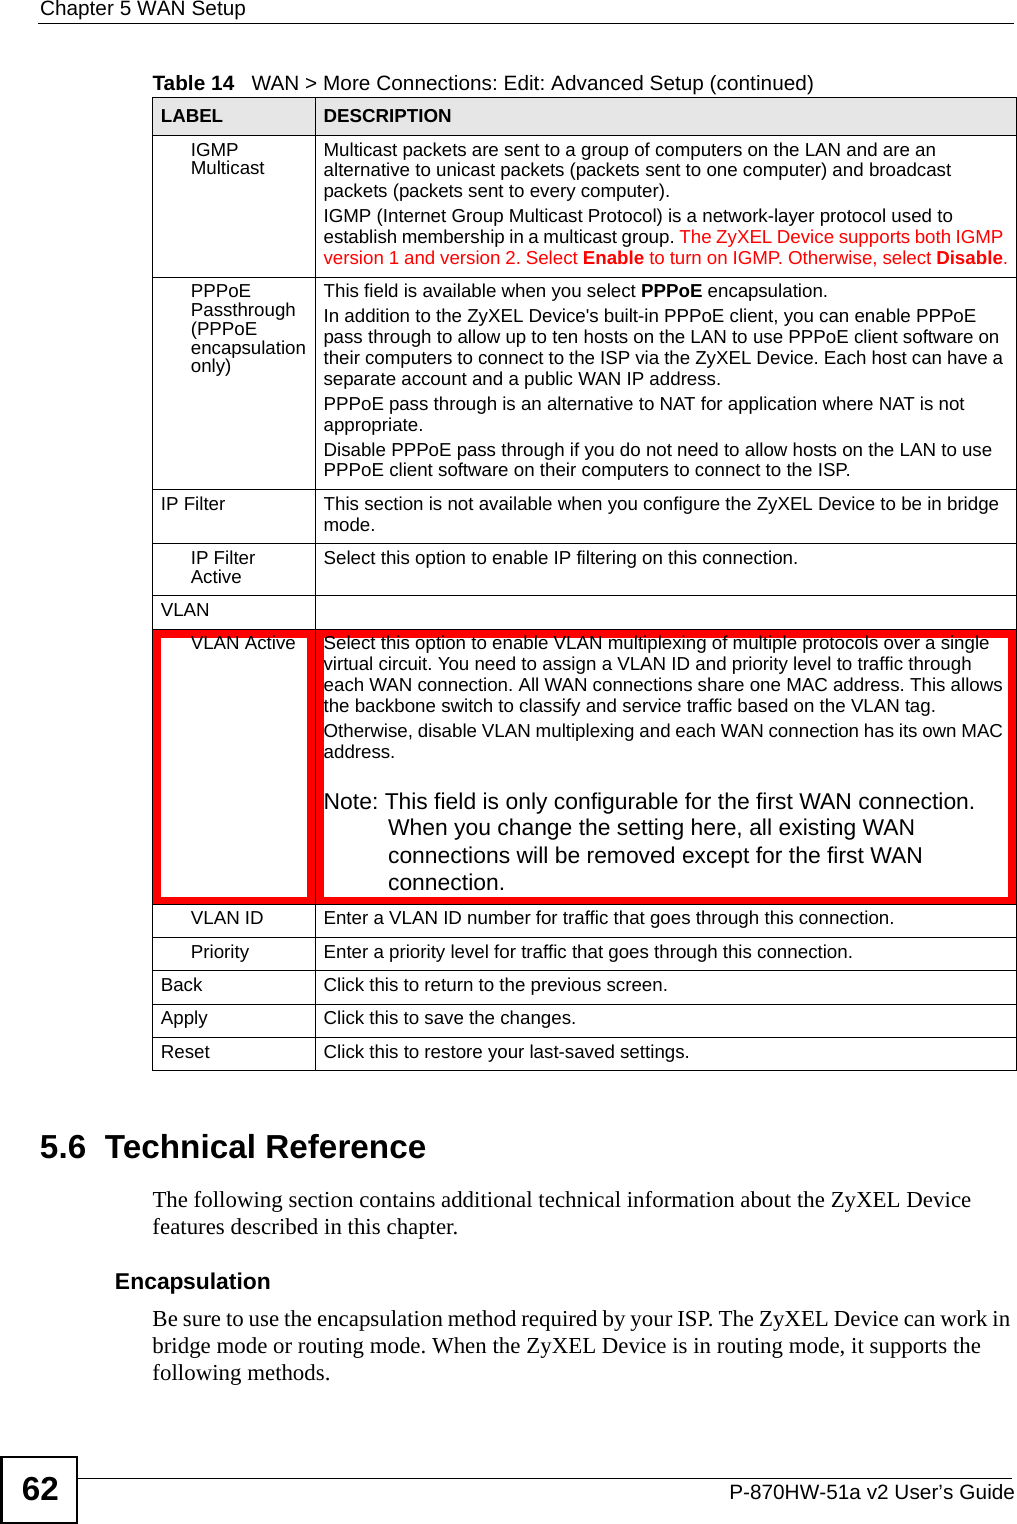 Chapter 5 WAN SetupP-870HW-51a v2 User’s Guide625.6  Technical ReferenceThe following section contains additional technical information about the ZyXEL Device features described in this chapter.EncapsulationBe sure to use the encapsulation method required by your ISP. The ZyXEL Device can work in bridge mode or routing mode. When the ZyXEL Device is in routing mode, it supports the following methods.IGMP Multicast Multicast packets are sent to a group of computers on the LAN and are an alternative to unicast packets (packets sent to one computer) and broadcast packets (packets sent to every computer).IGMP (Internet Group Multicast Protocol) is a network-layer protocol used to establish membership in a multicast group. The ZyXEL Device supports both IGMP version 1 and version 2. Select Enable to turn on IGMP. Otherwise, select Disable.PPPoE Passthrough (PPPoE encapsulation only)This field is available when you select PPPoE encapsulation. In addition to the ZyXEL Device&apos;s built-in PPPoE client, you can enable PPPoE pass through to allow up to ten hosts on the LAN to use PPPoE client software on their computers to connect to the ISP via the ZyXEL Device. Each host can have a separate account and a public WAN IP address. PPPoE pass through is an alternative to NAT for application where NAT is not appropriate.Disable PPPoE pass through if you do not need to allow hosts on the LAN to use PPPoE client software on their computers to connect to the ISP.IP Filter This section is not available when you configure the ZyXEL Device to be in bridge mode.IP Filter Active Select this option to enable IP filtering on this connection.VLANVLAN Active Select this option to enable VLAN multiplexing of multiple protocols over a single virtual circuit. You need to assign a VLAN ID and priority level to traffic through each WAN connection. All WAN connections share one MAC address. This allows the backbone switch to classify and service traffic based on the VLAN tag.Otherwise, disable VLAN multiplexing and each WAN connection has its own MAC address.Note: This field is only configurable for the first WAN connection. When you change the setting here, all existing WAN connections will be removed except for the first WAN connection.VLAN ID Enter a VLAN ID number for traffic that goes through this connection.Priority Enter a priority level for traffic that goes through this connection.Back Click this to return to the previous screen.Apply Click this to save the changes. Reset Click this to restore your last-saved settings.Table 14   WAN &gt; More Connections: Edit: Advanced Setup (continued)LABEL DESCRIPTION